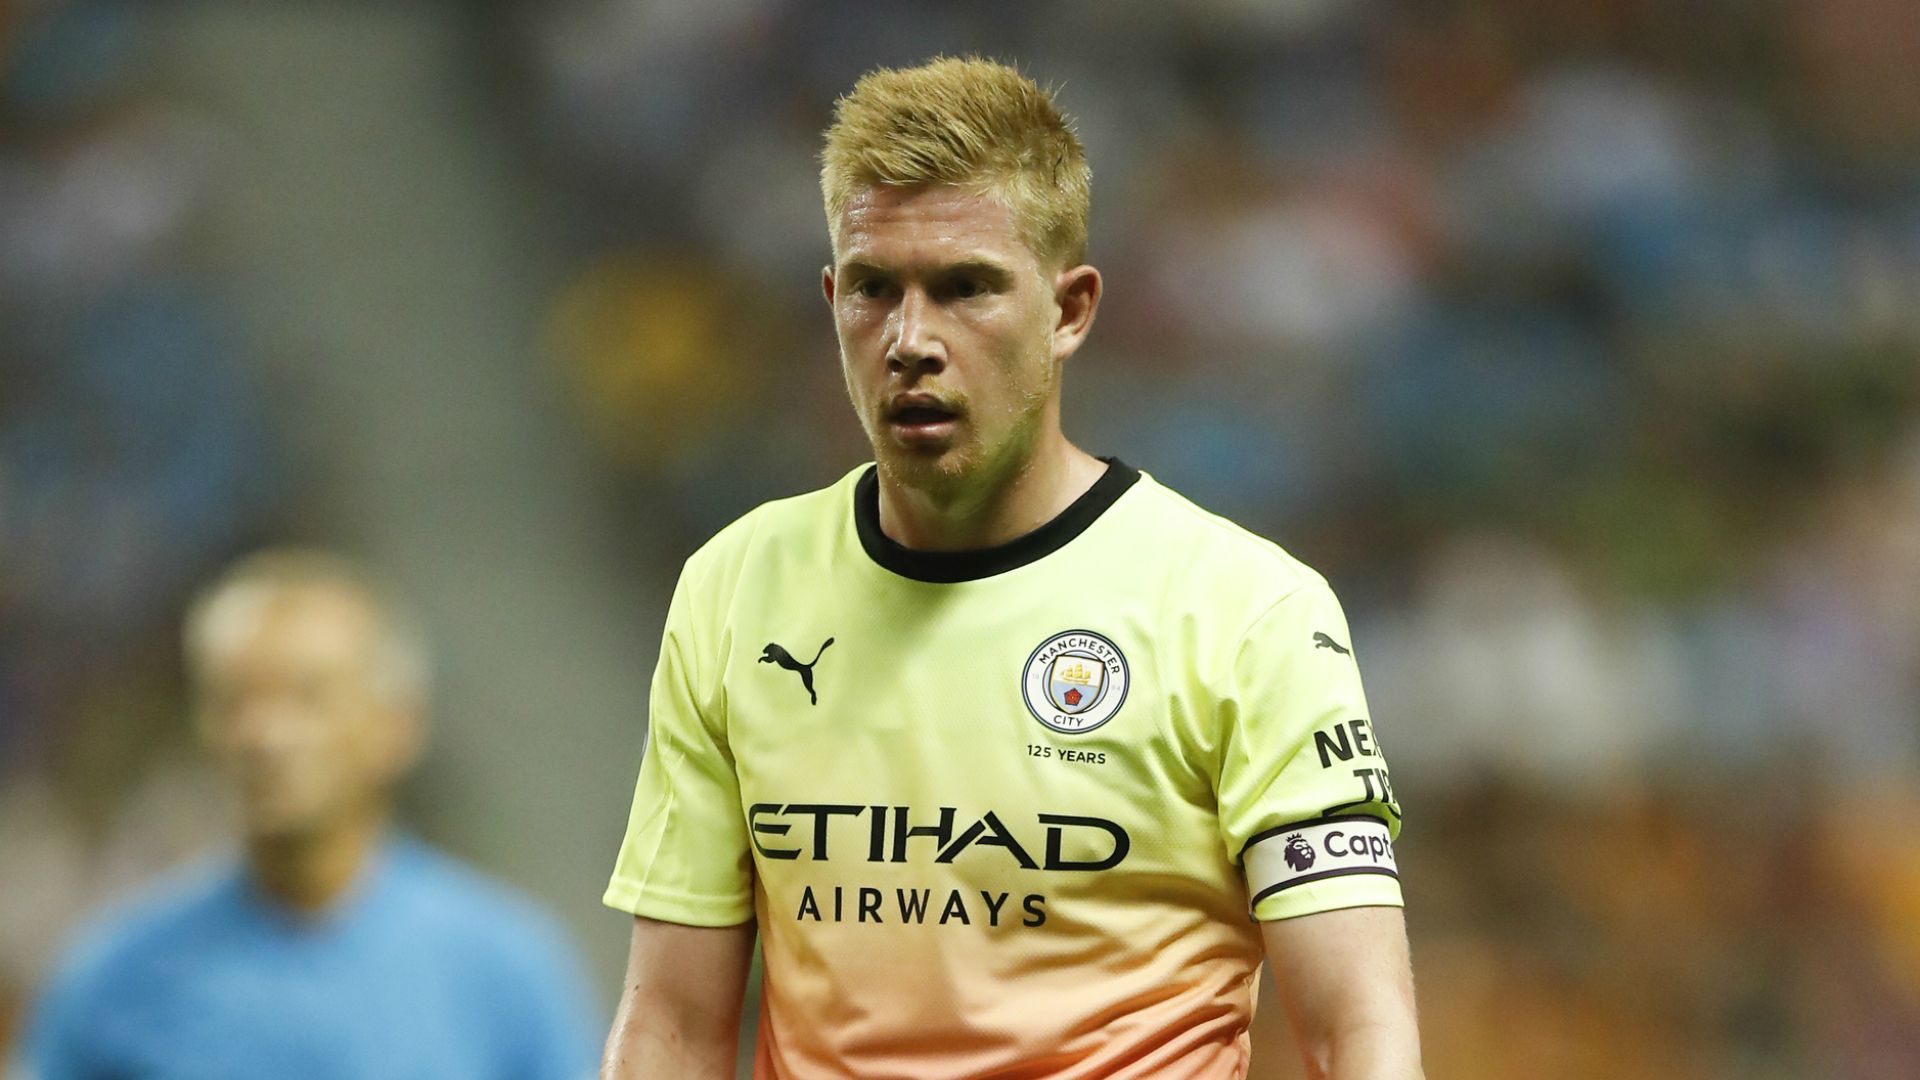 Manchester City News: Kevin De Bruyne is fit and ready to go